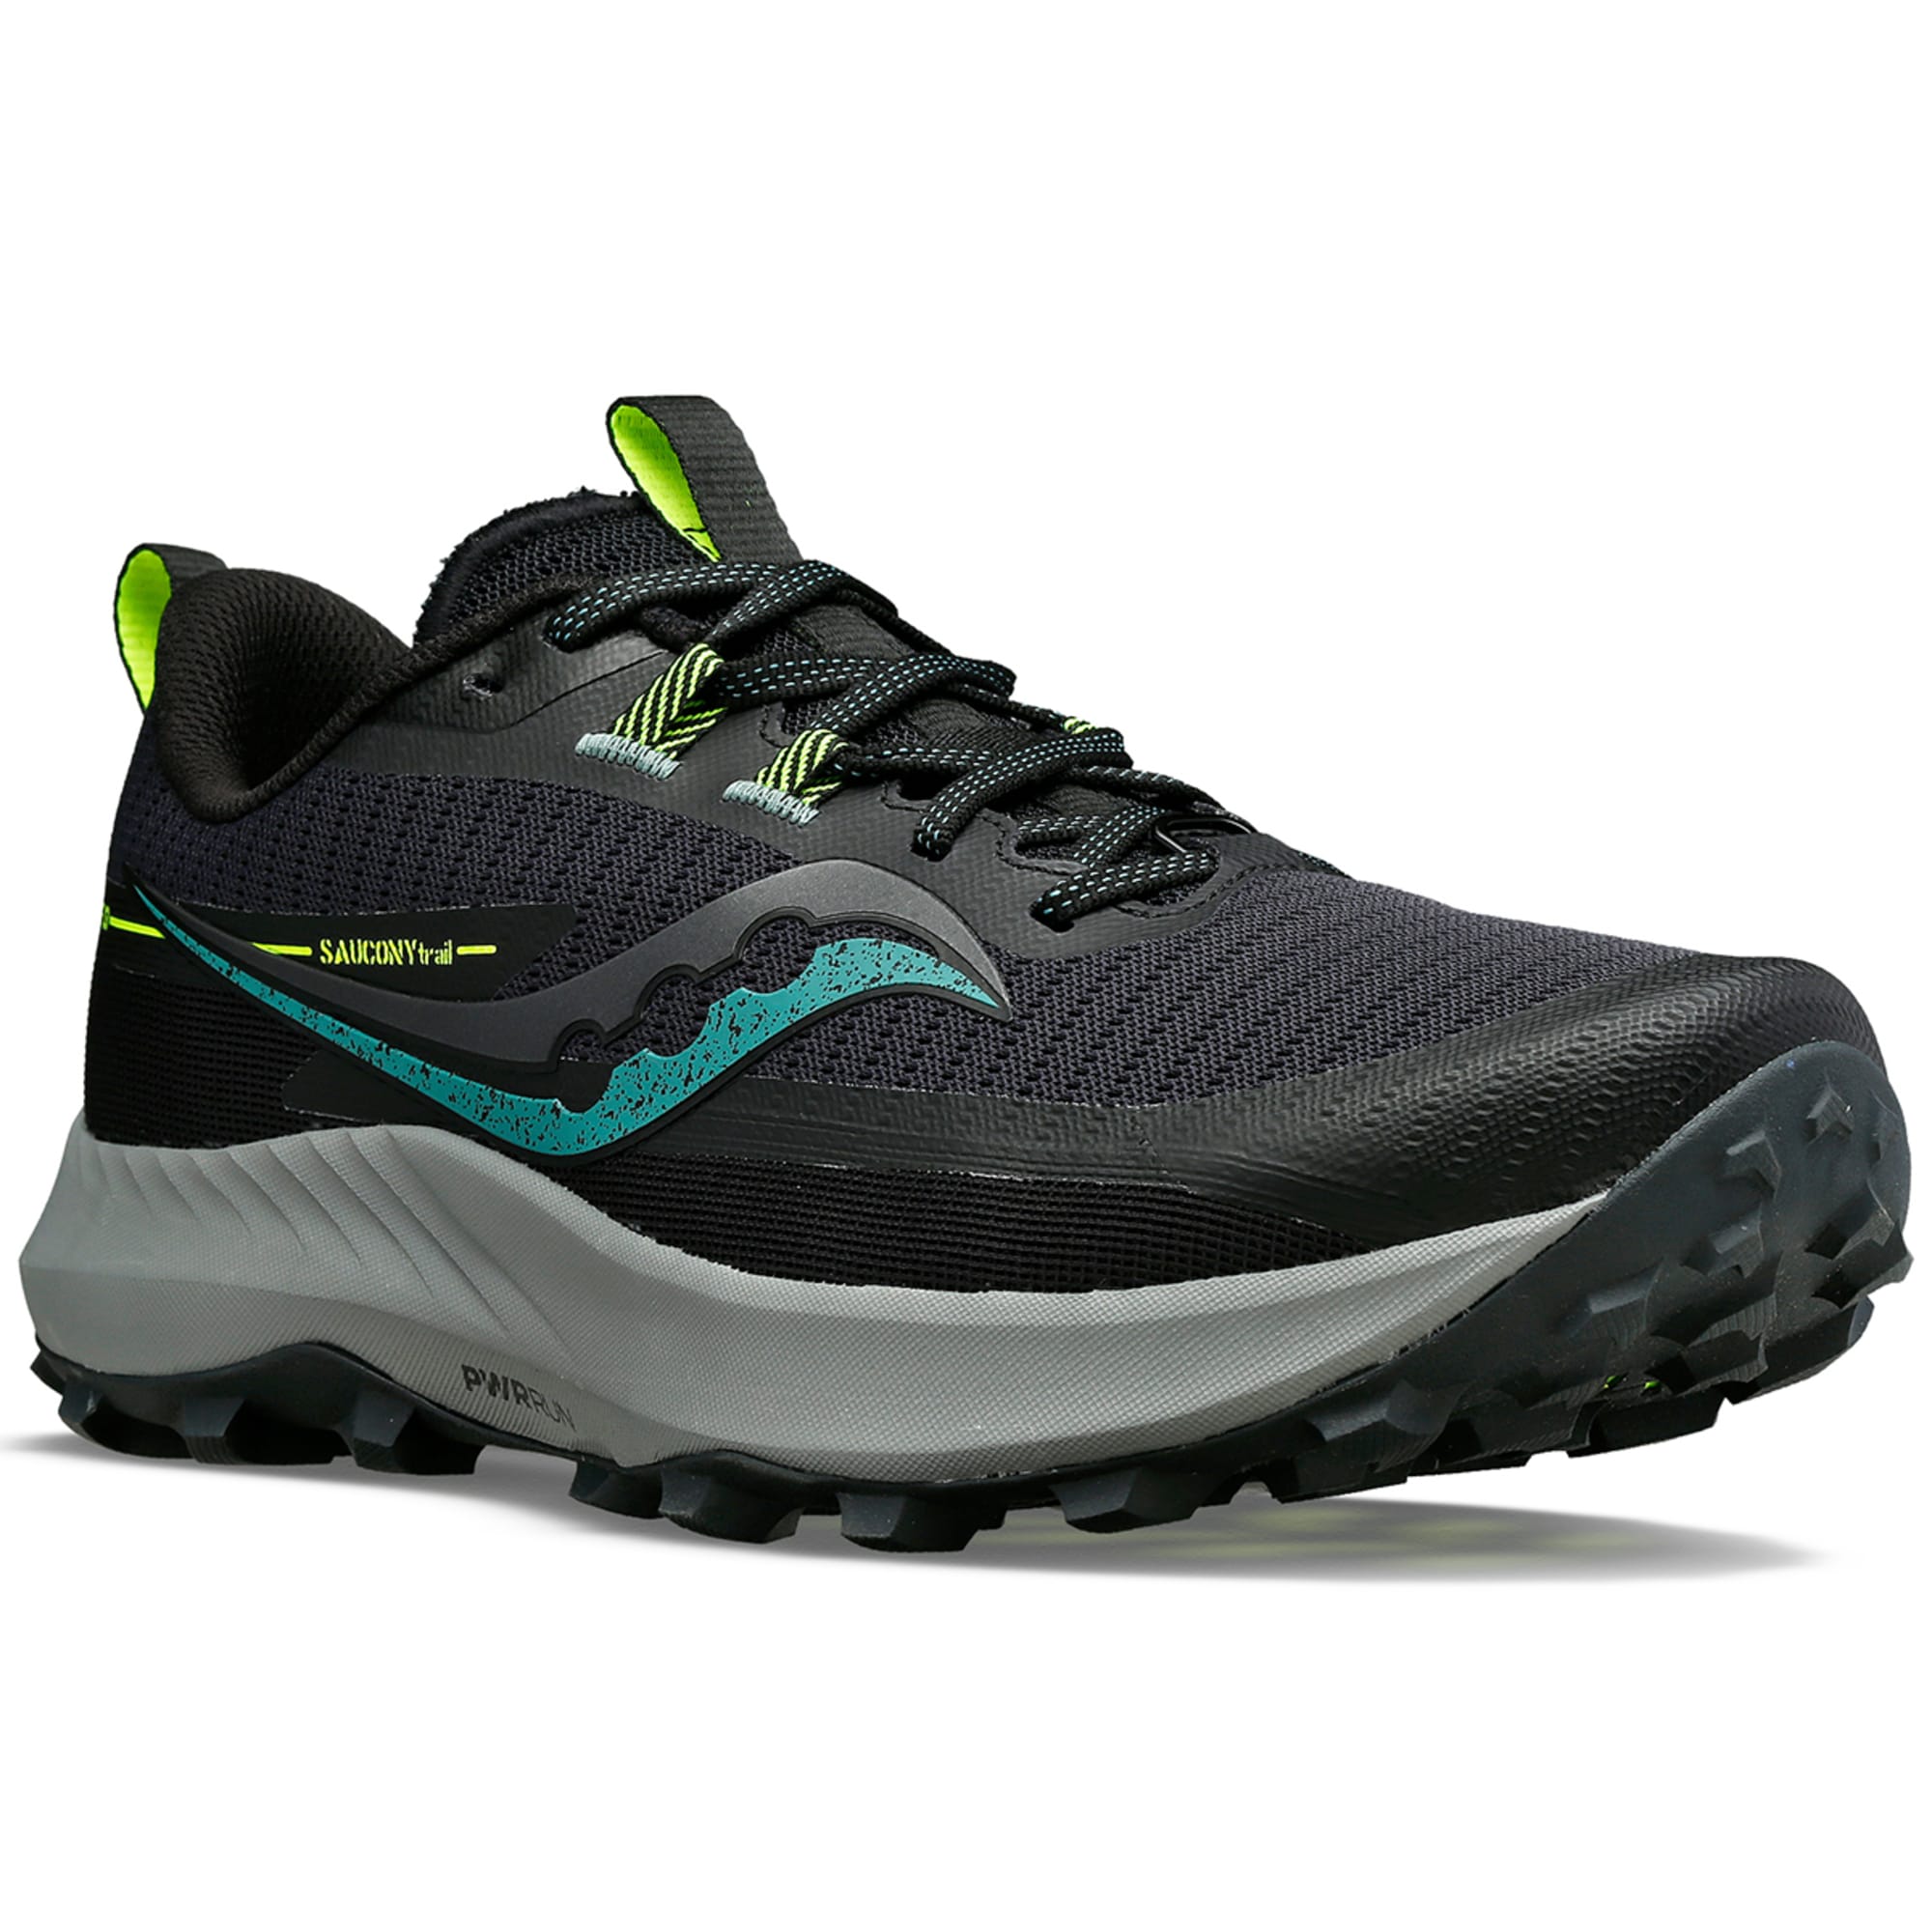 SAUCONY Men's Peregrine 13 Trail Running Shoes